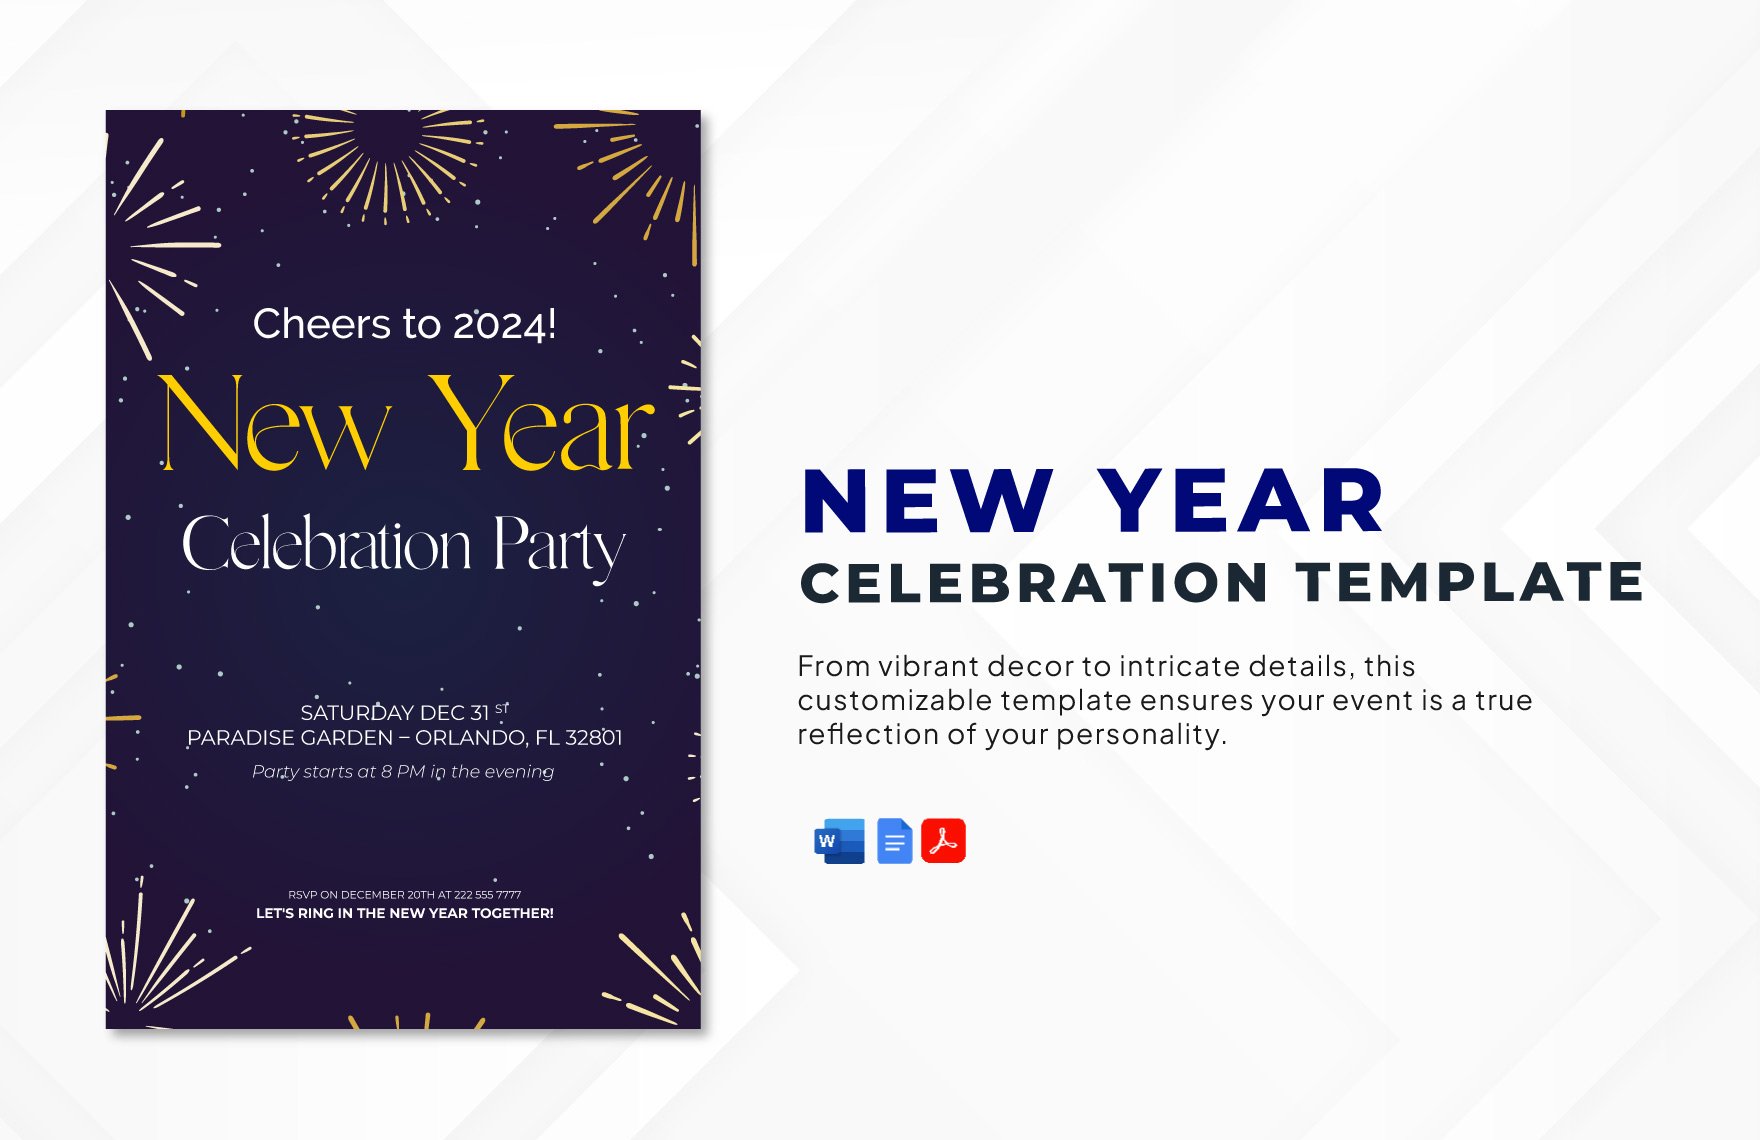 New Year Celebration Template